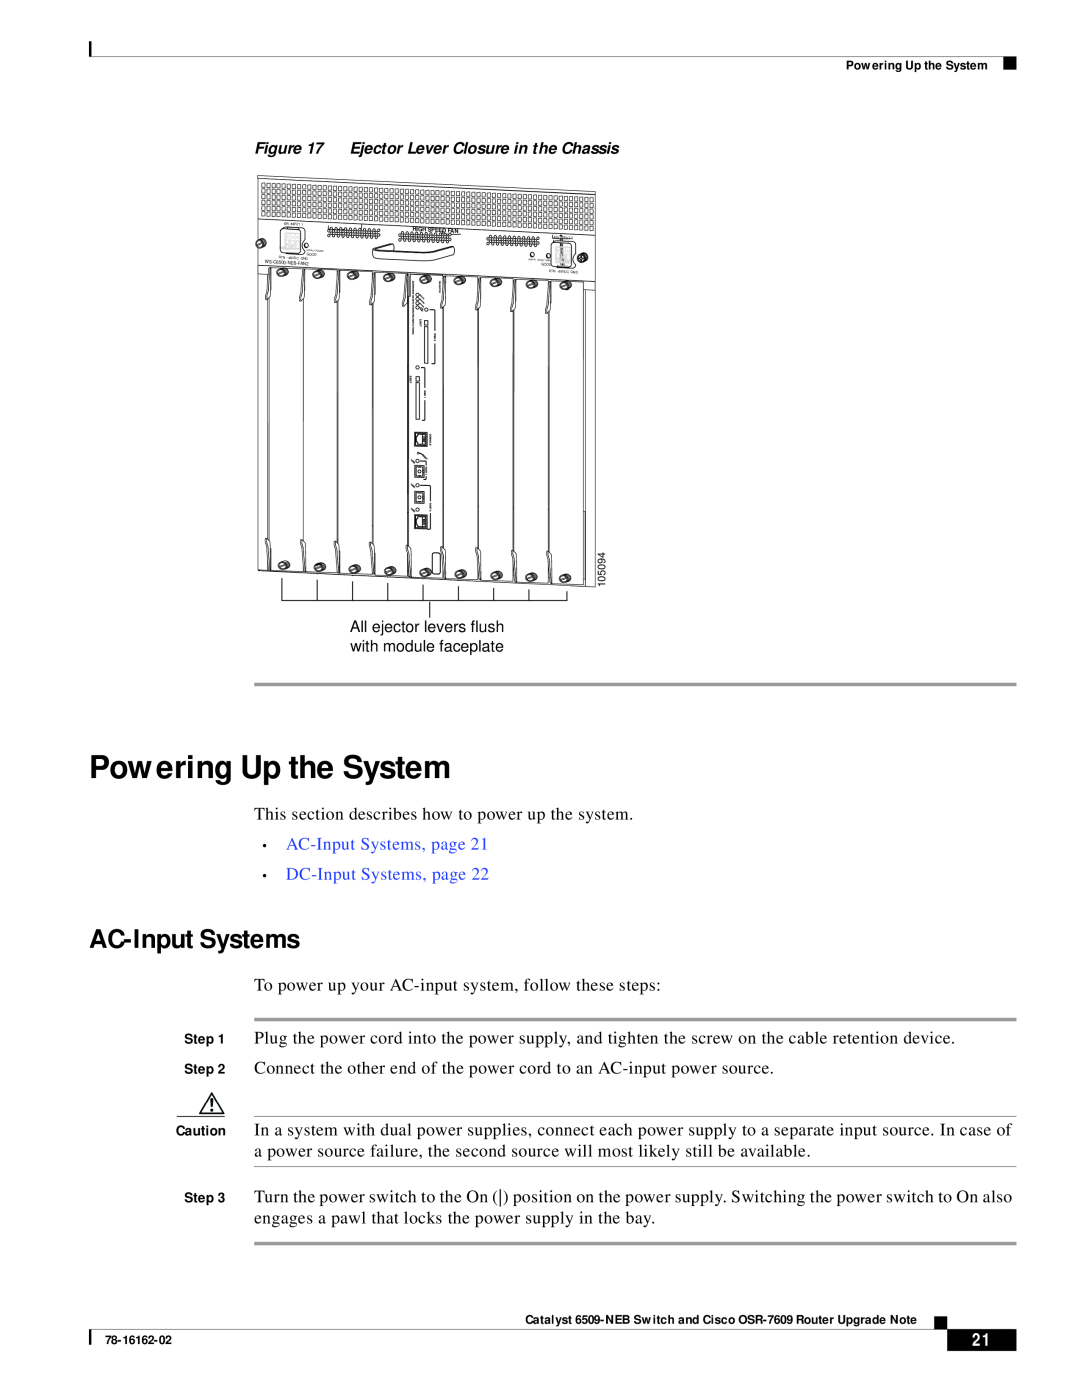 Cisco Systems OSR-7609, 6509-NEB manual Powering Up the System, AC-Input Systems, page DC-Input Systems, page 